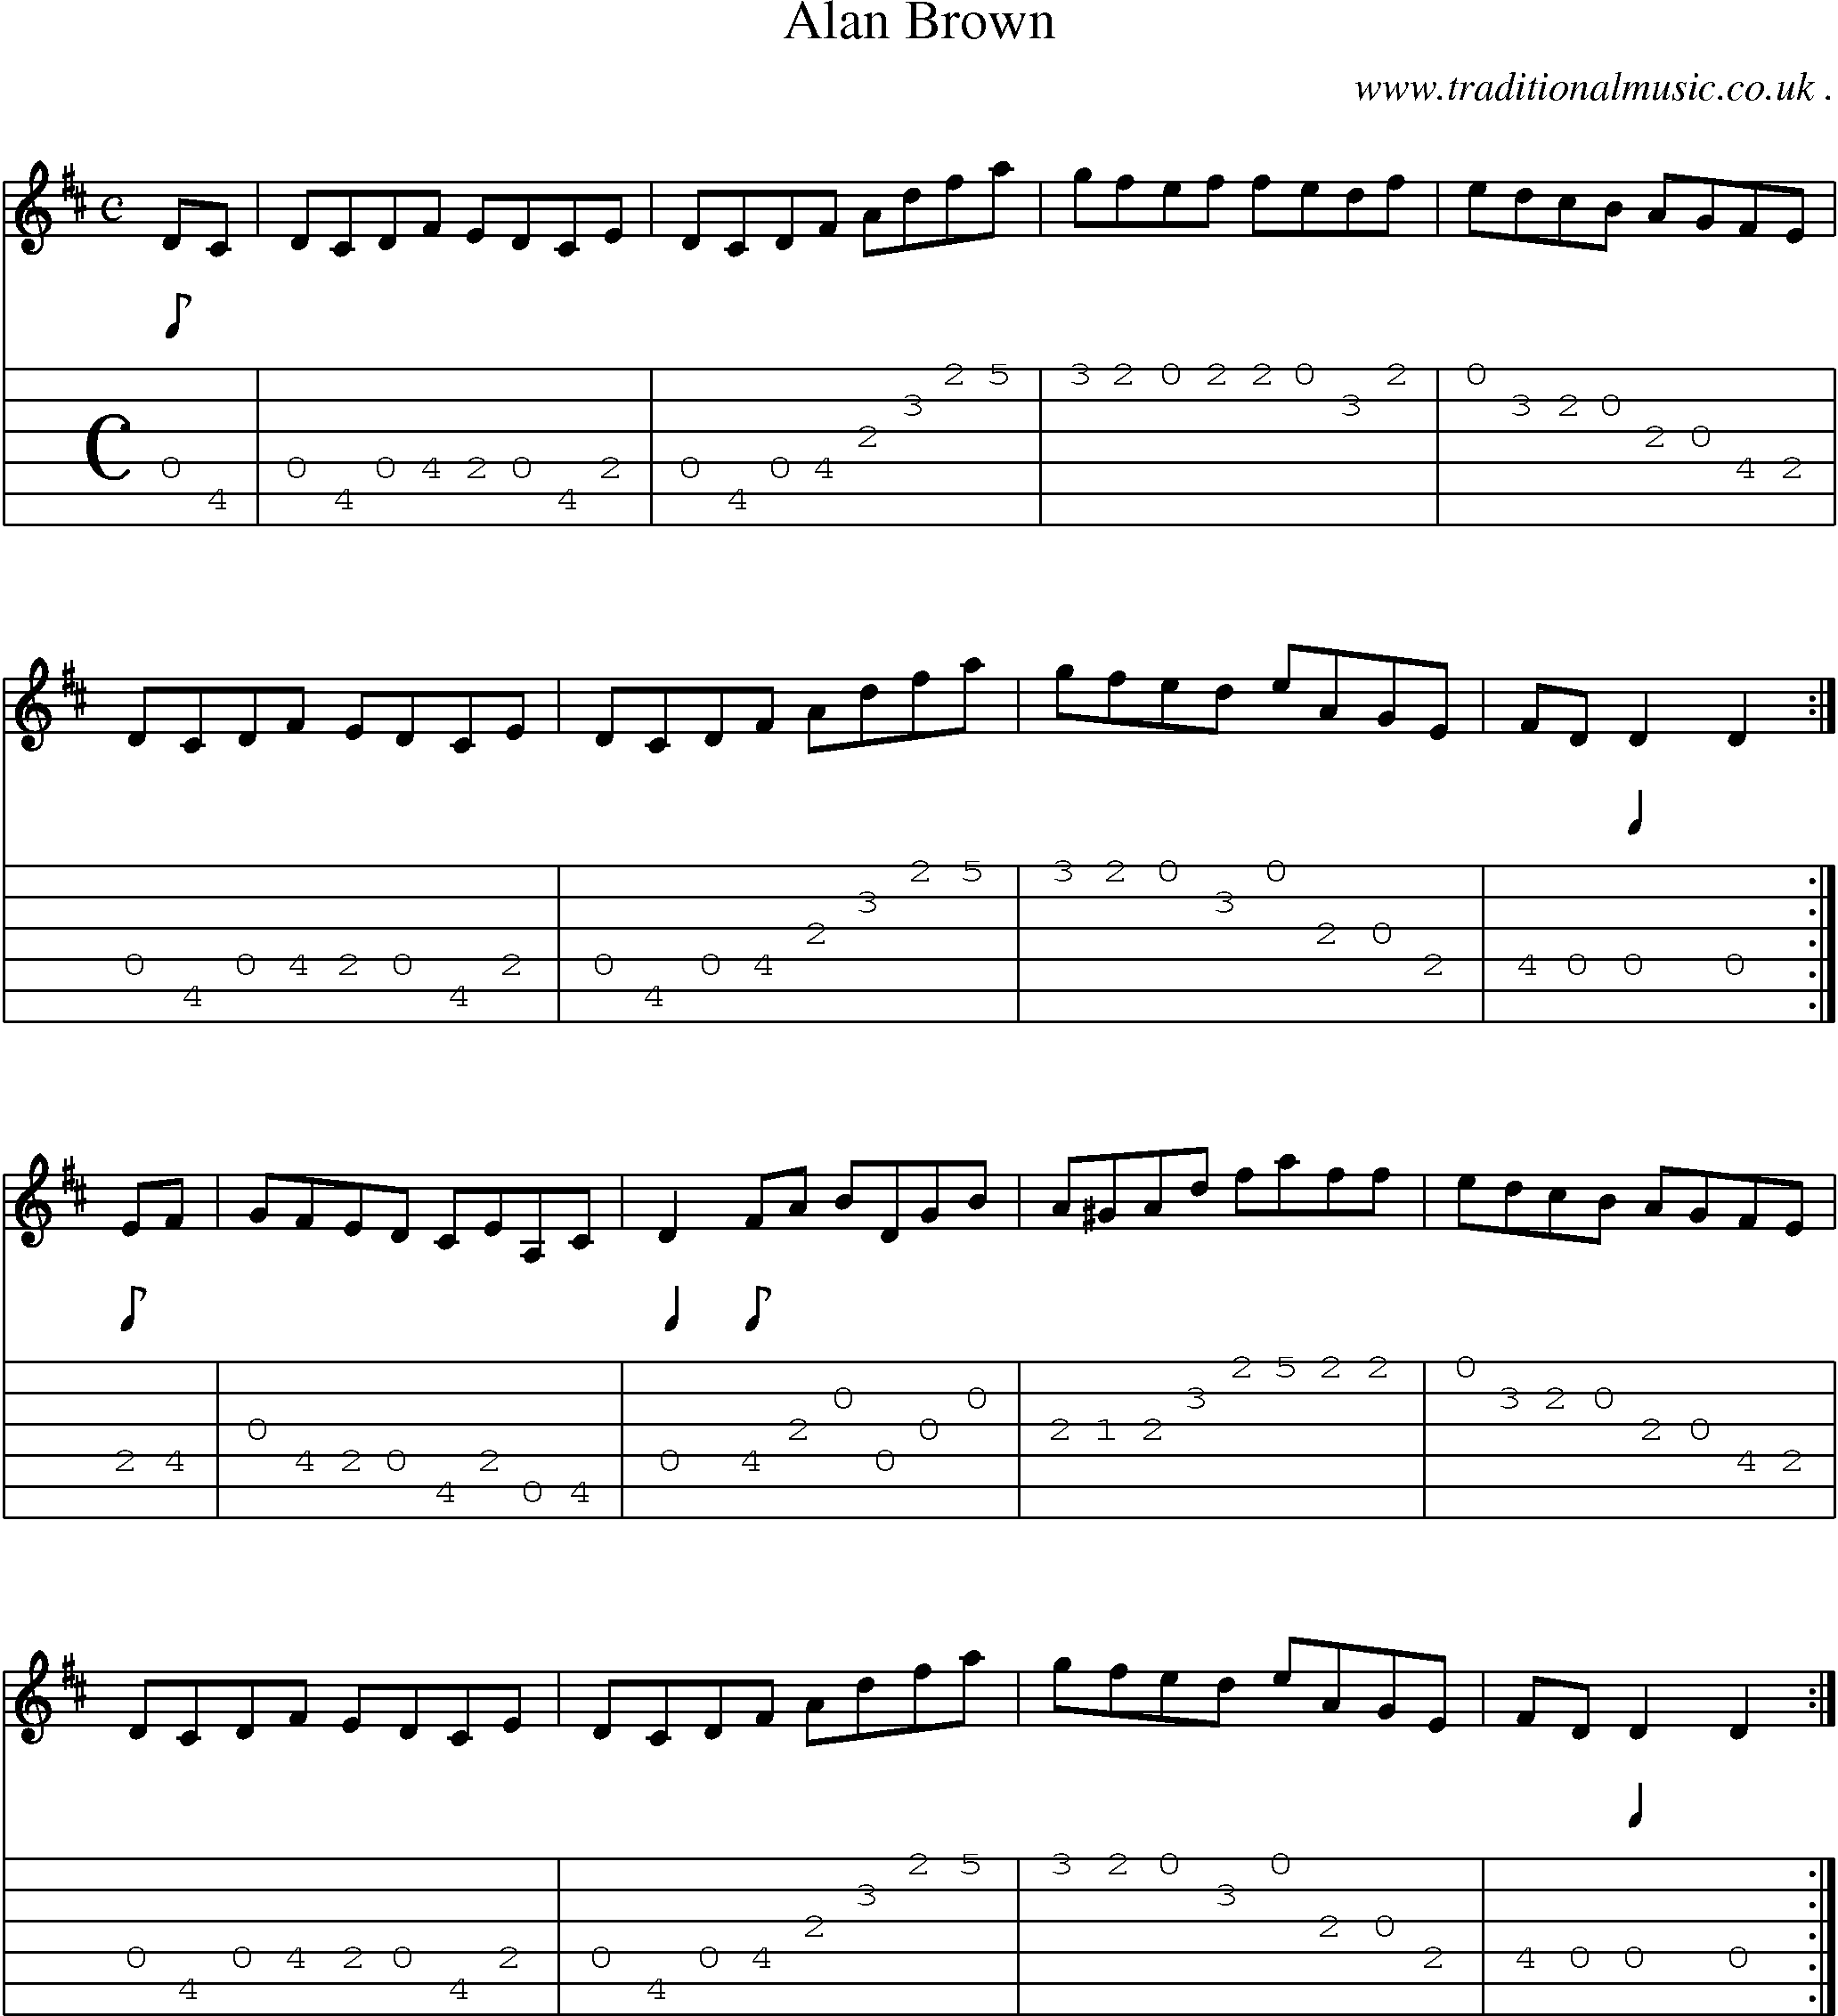 Sheet-music  score, Chords and Guitar Tabs for Alan Brown